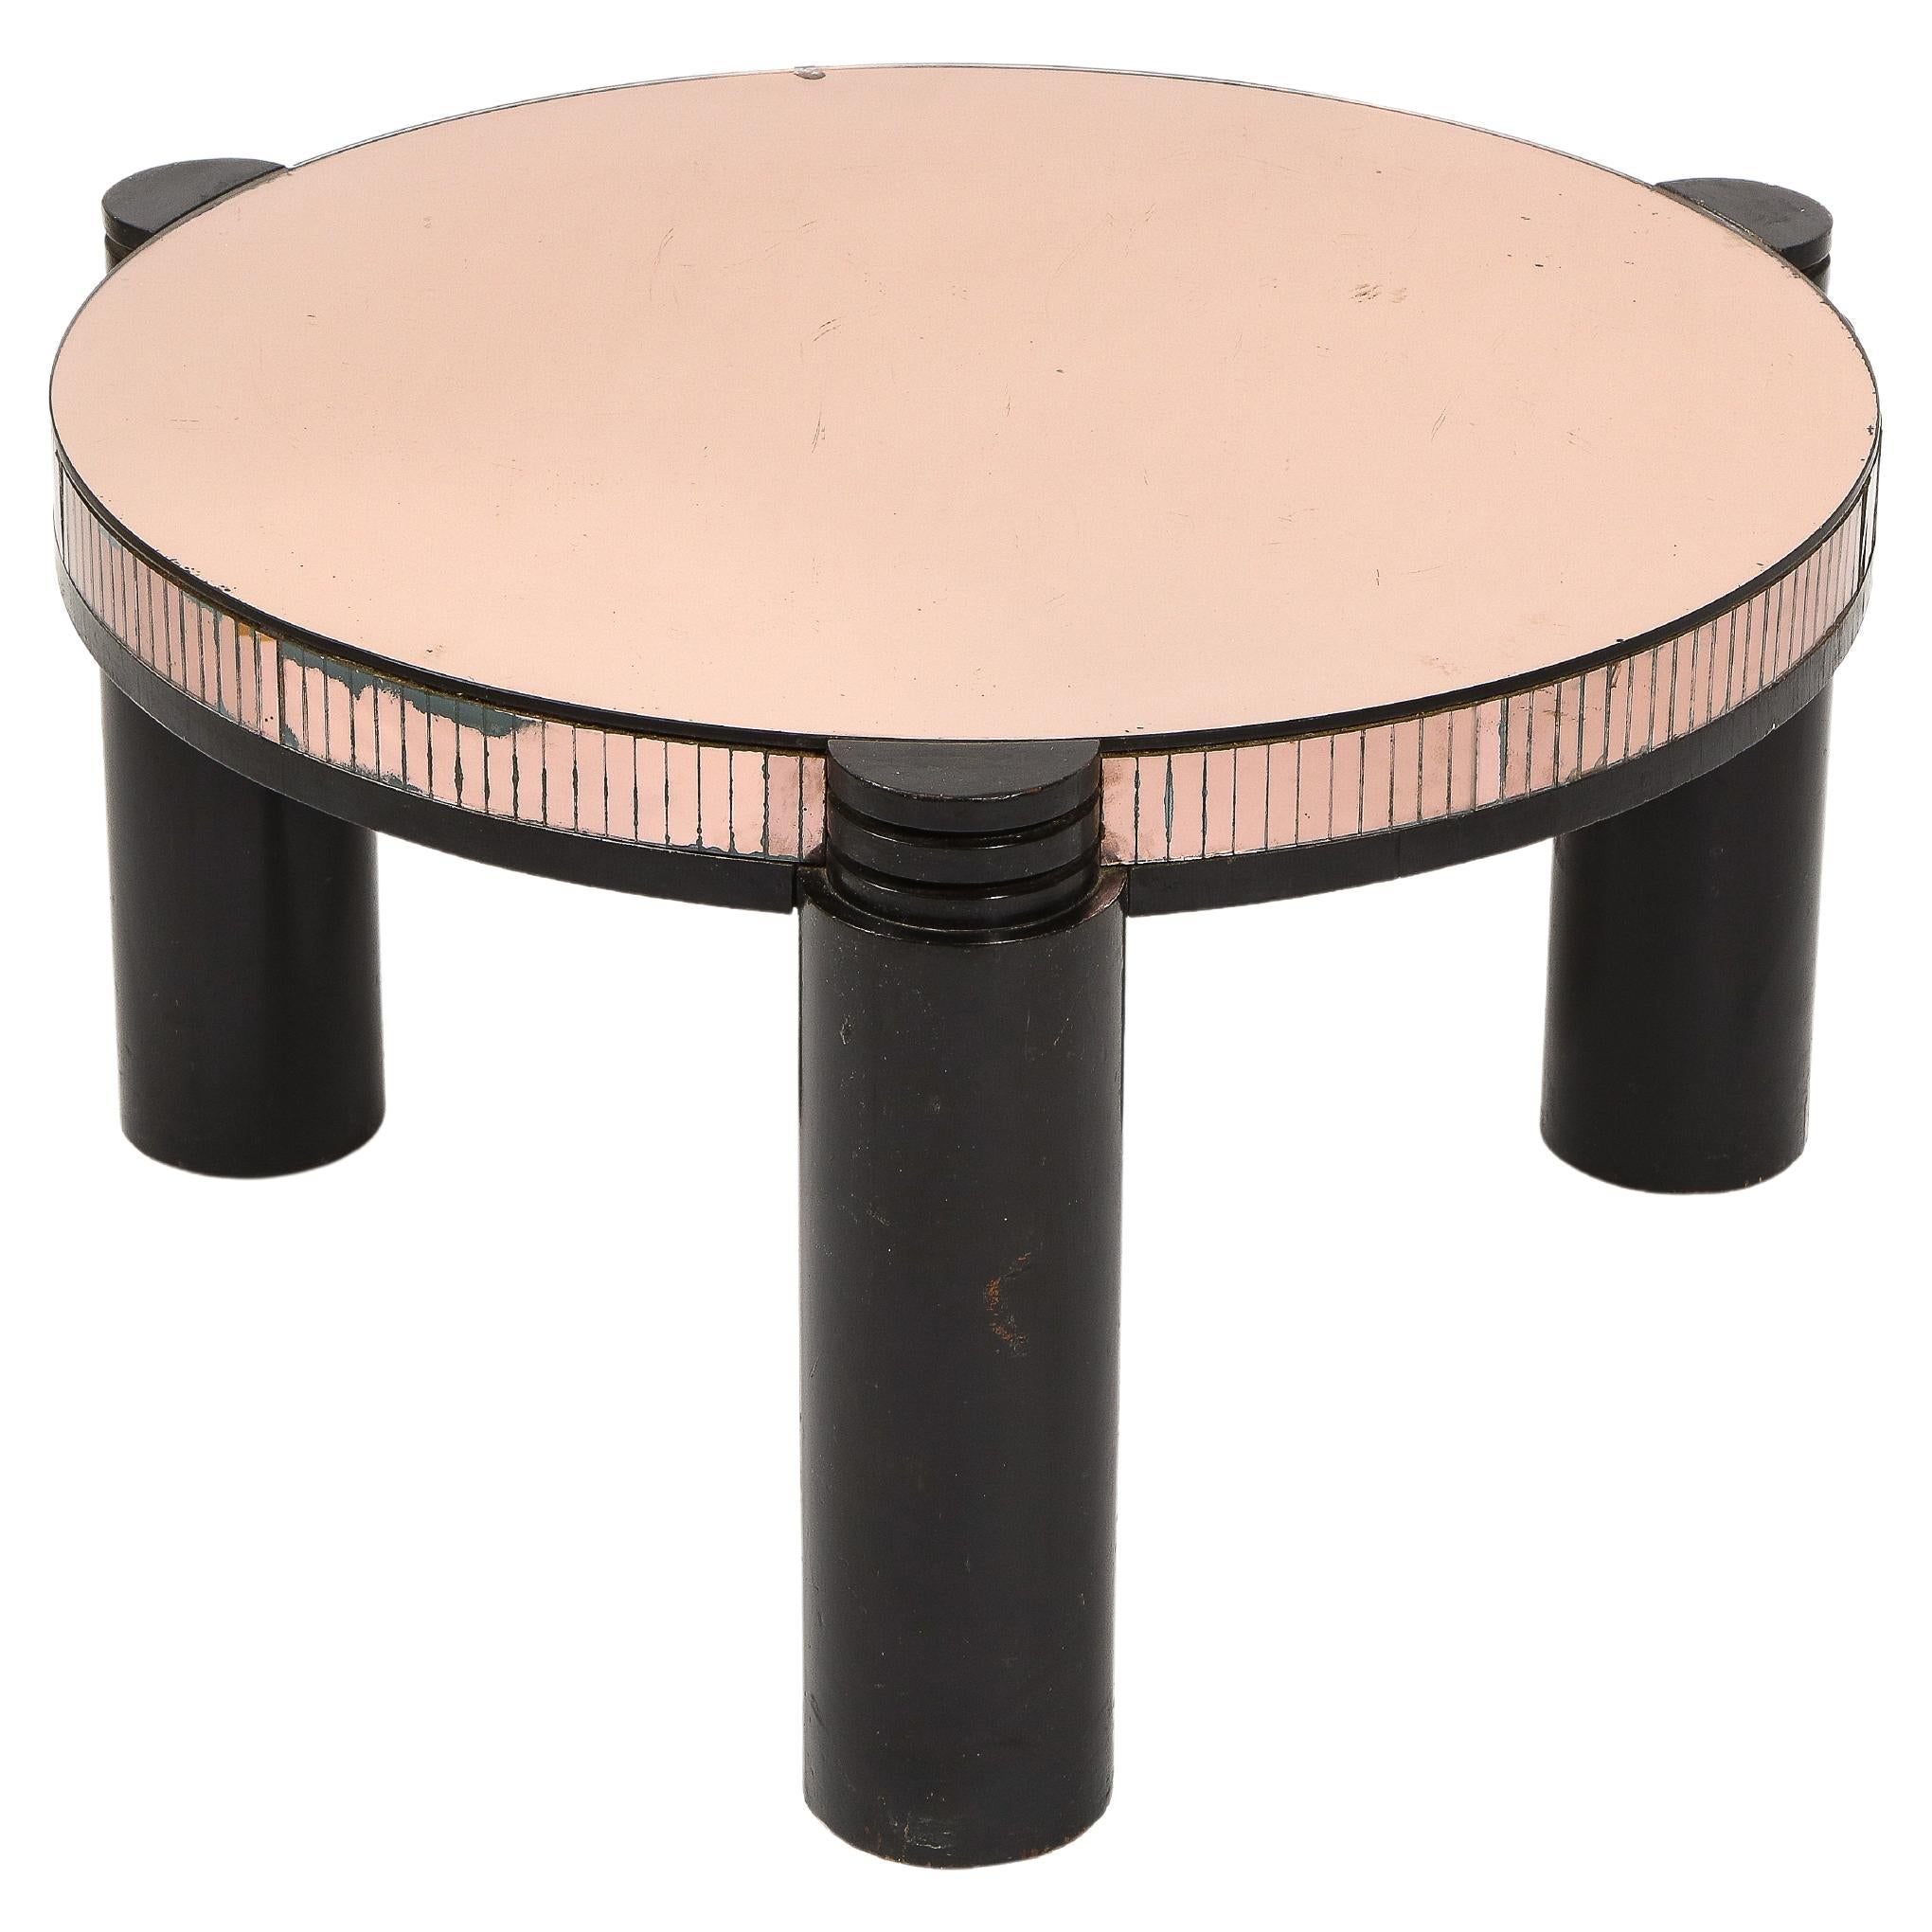 Black Ebonized & Pink Mirror Round Deco Style Cocktail Table, France 1940's For Sale